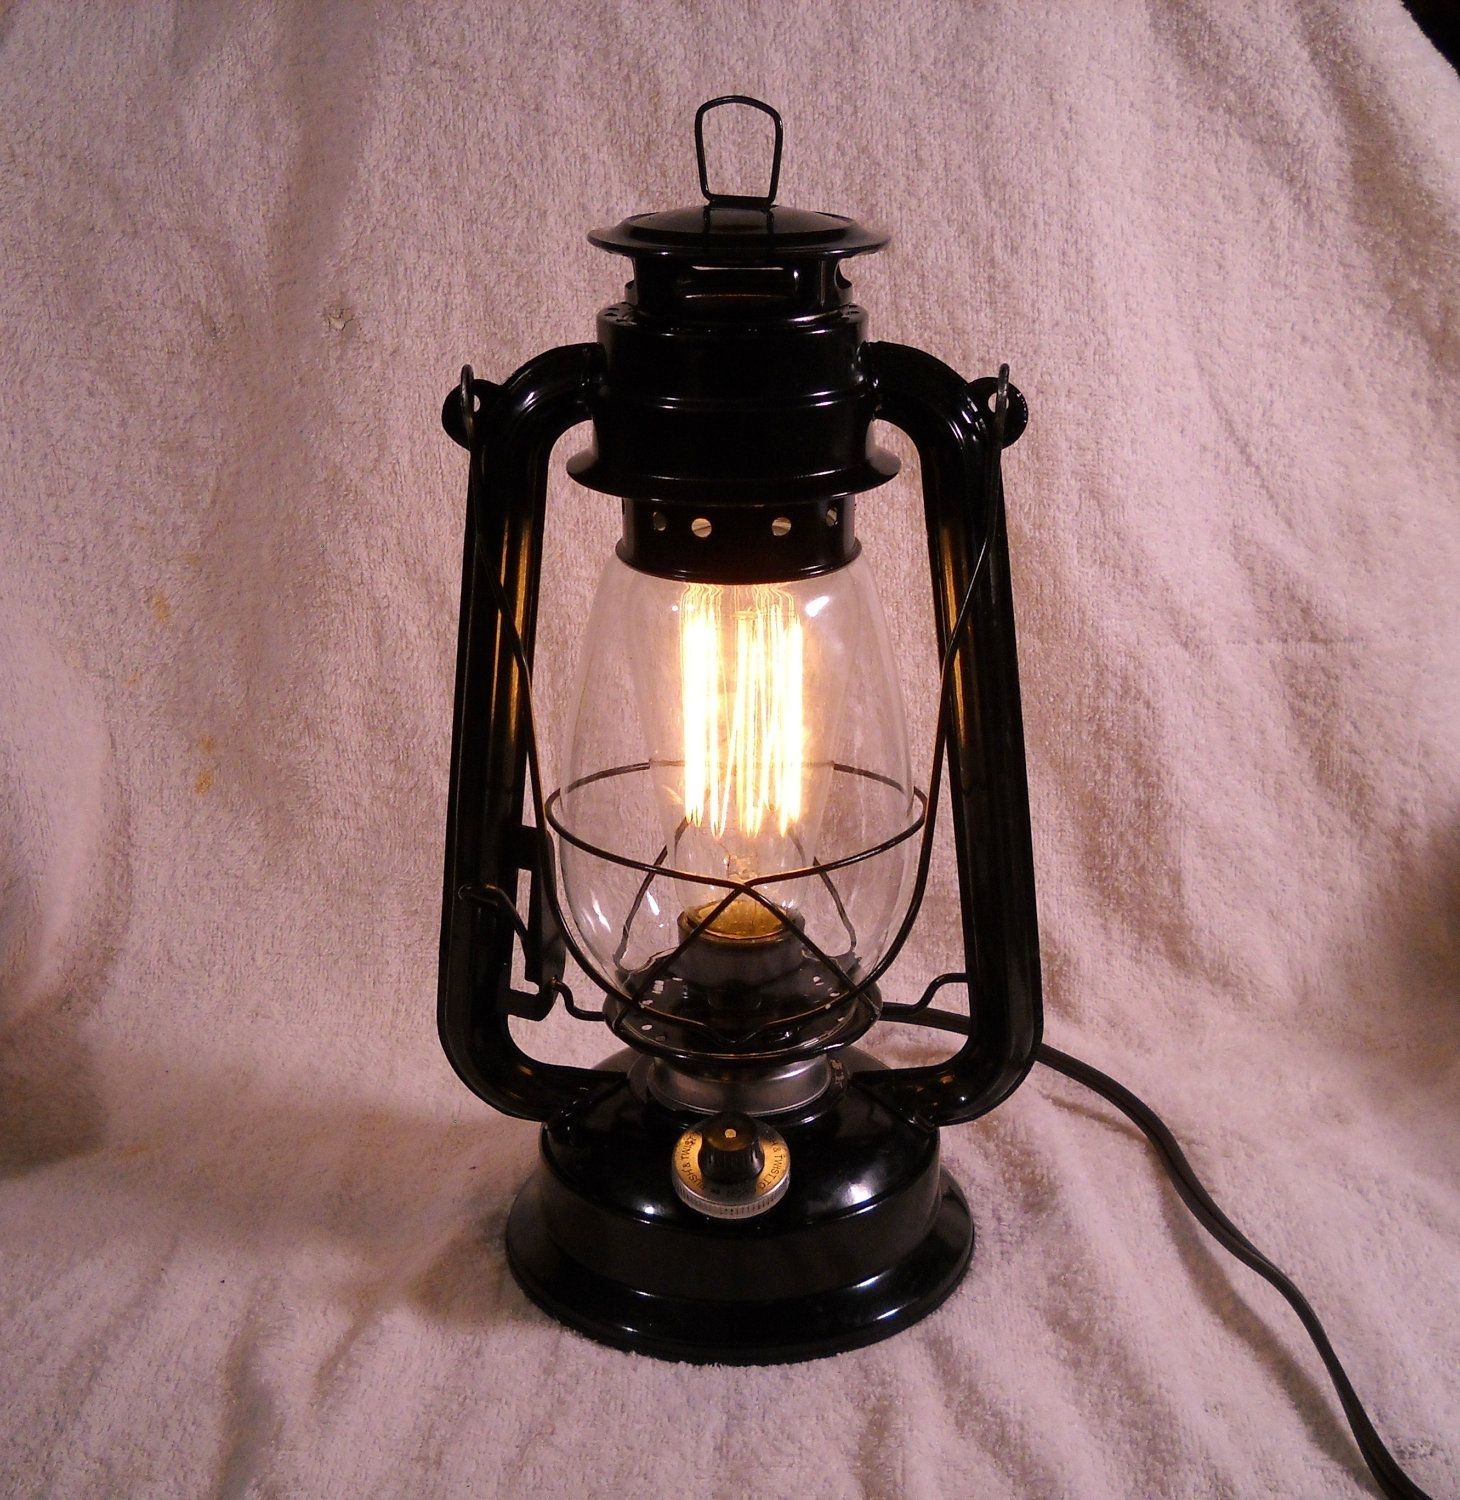 Black Electric Lantern Industrial Table Lamp Hanging Lighting With Intended For Rustic Outdoor Electric Lanterns (View 13 of 20)